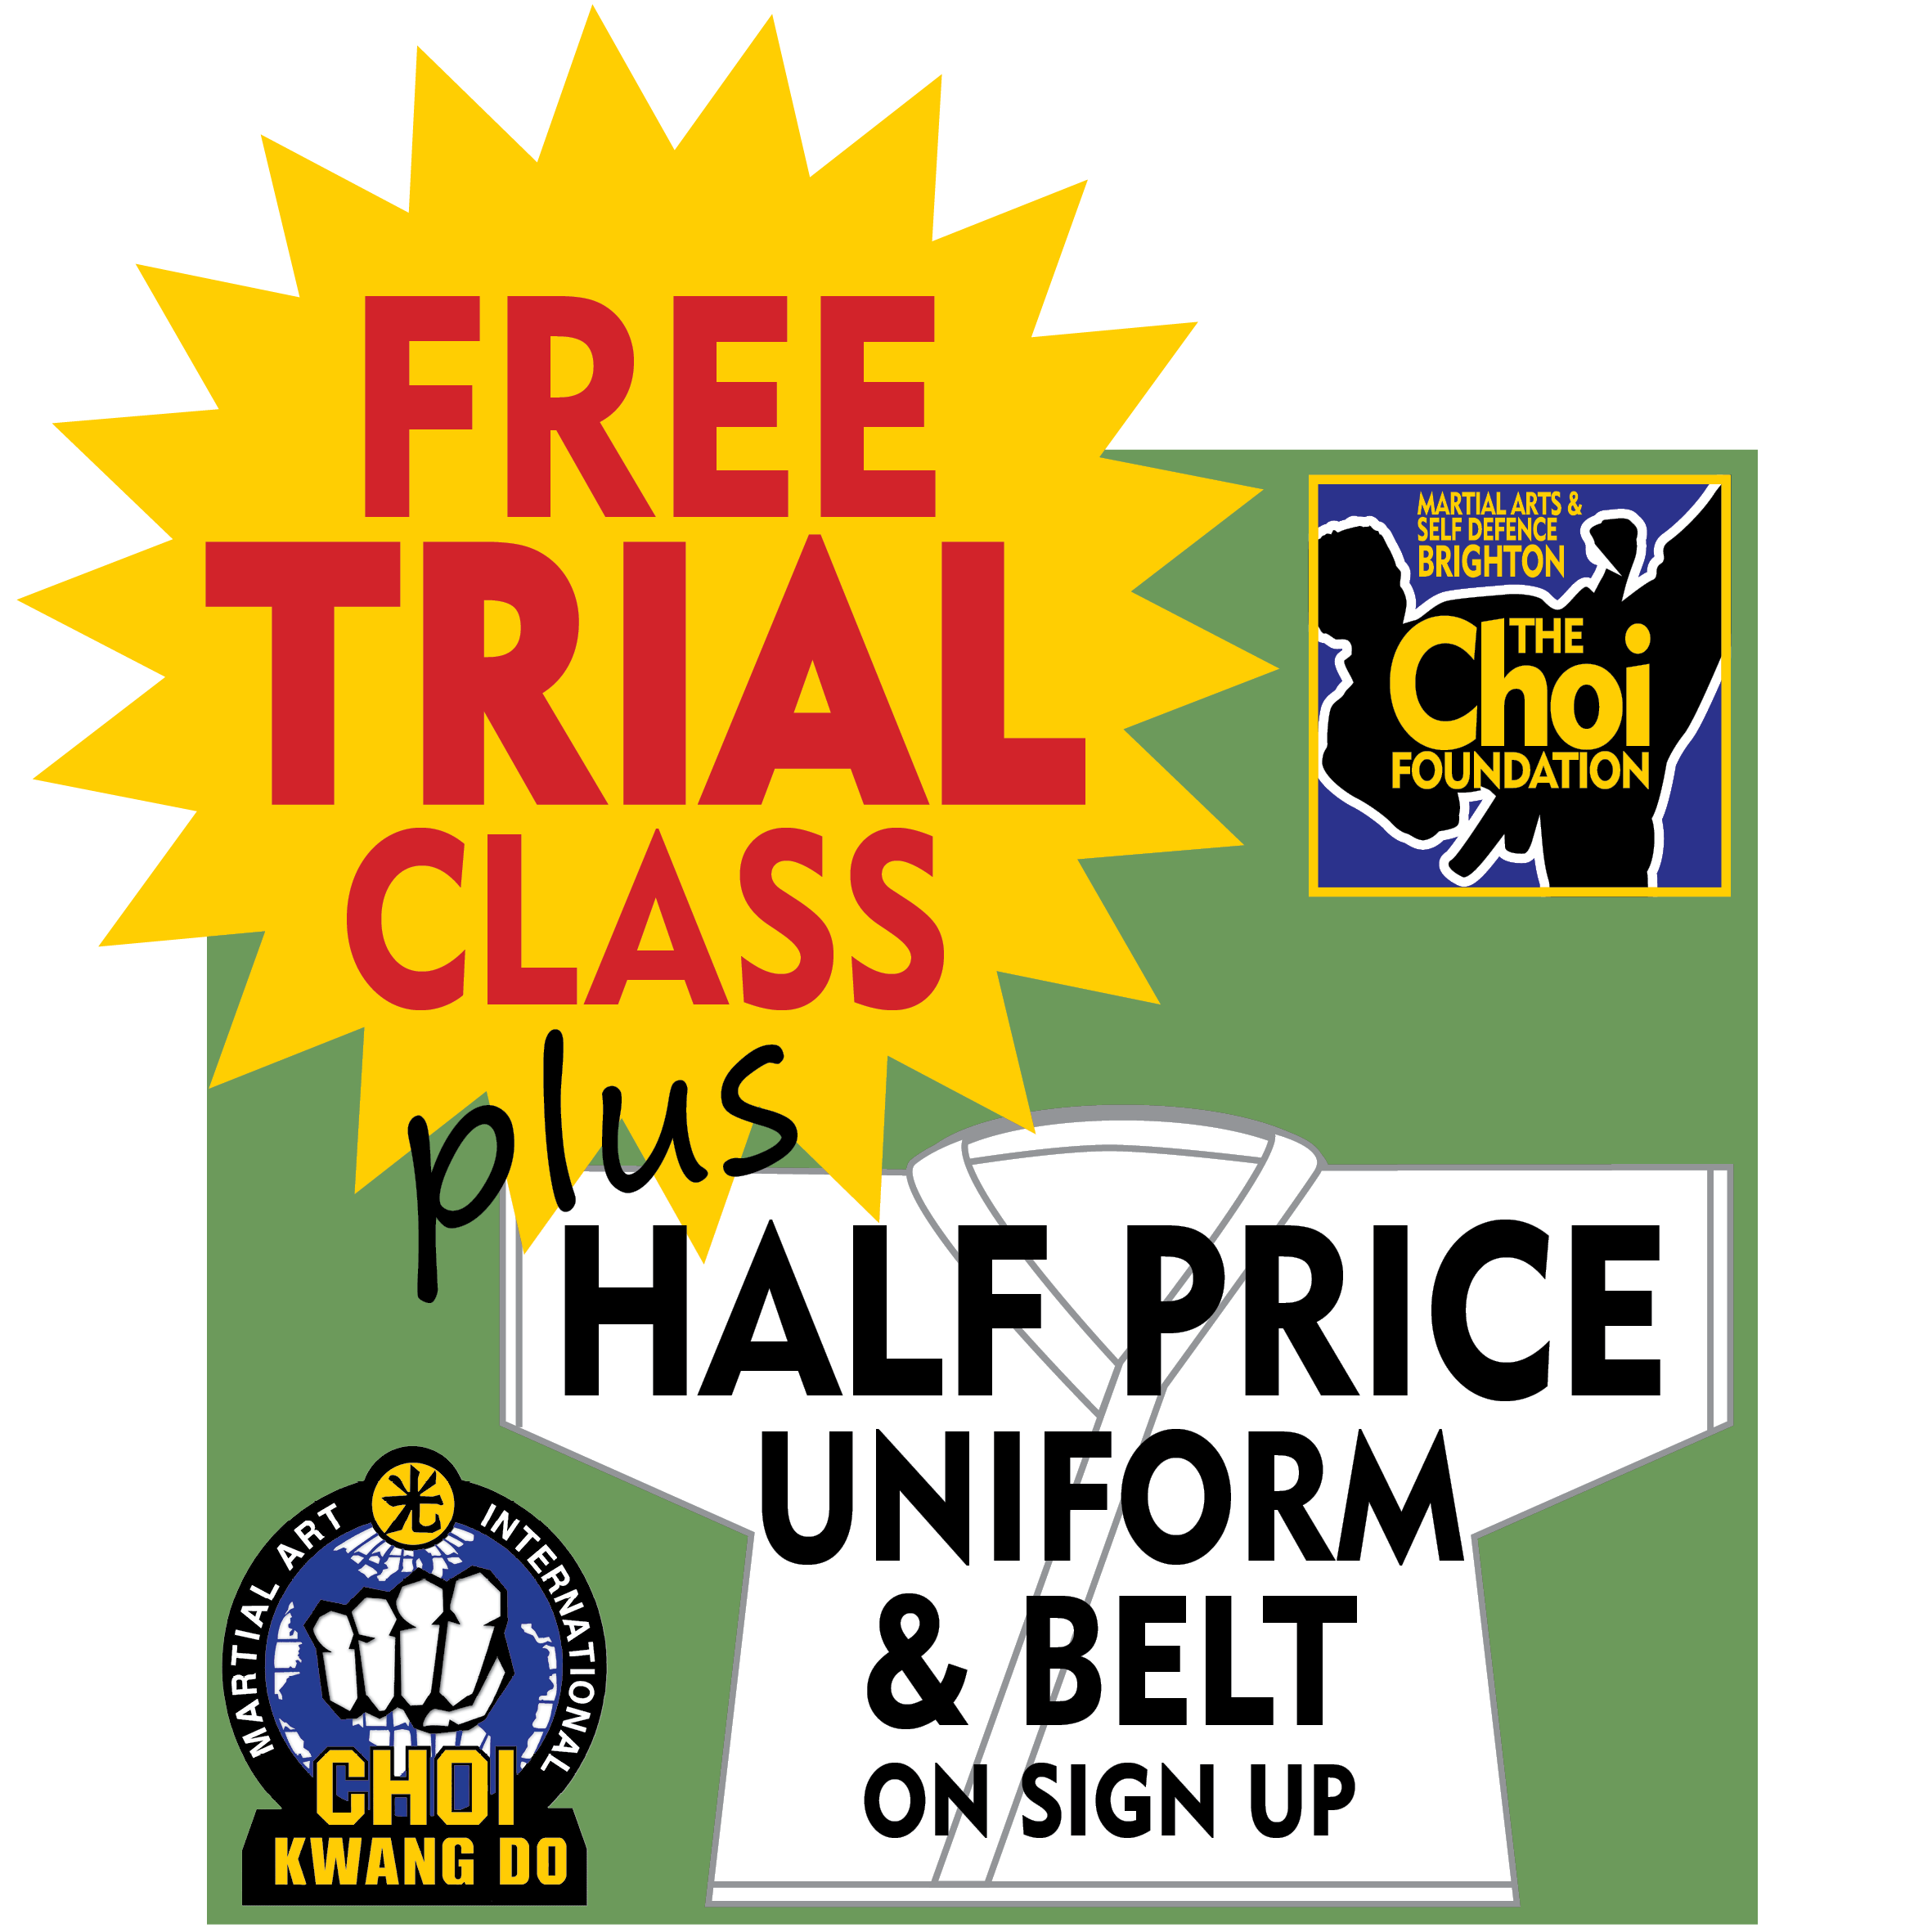 FREE trial class and half price uniform at Brighton Marital Arts and Self-defence classes, The Choi Foundation, Robert Tanswell